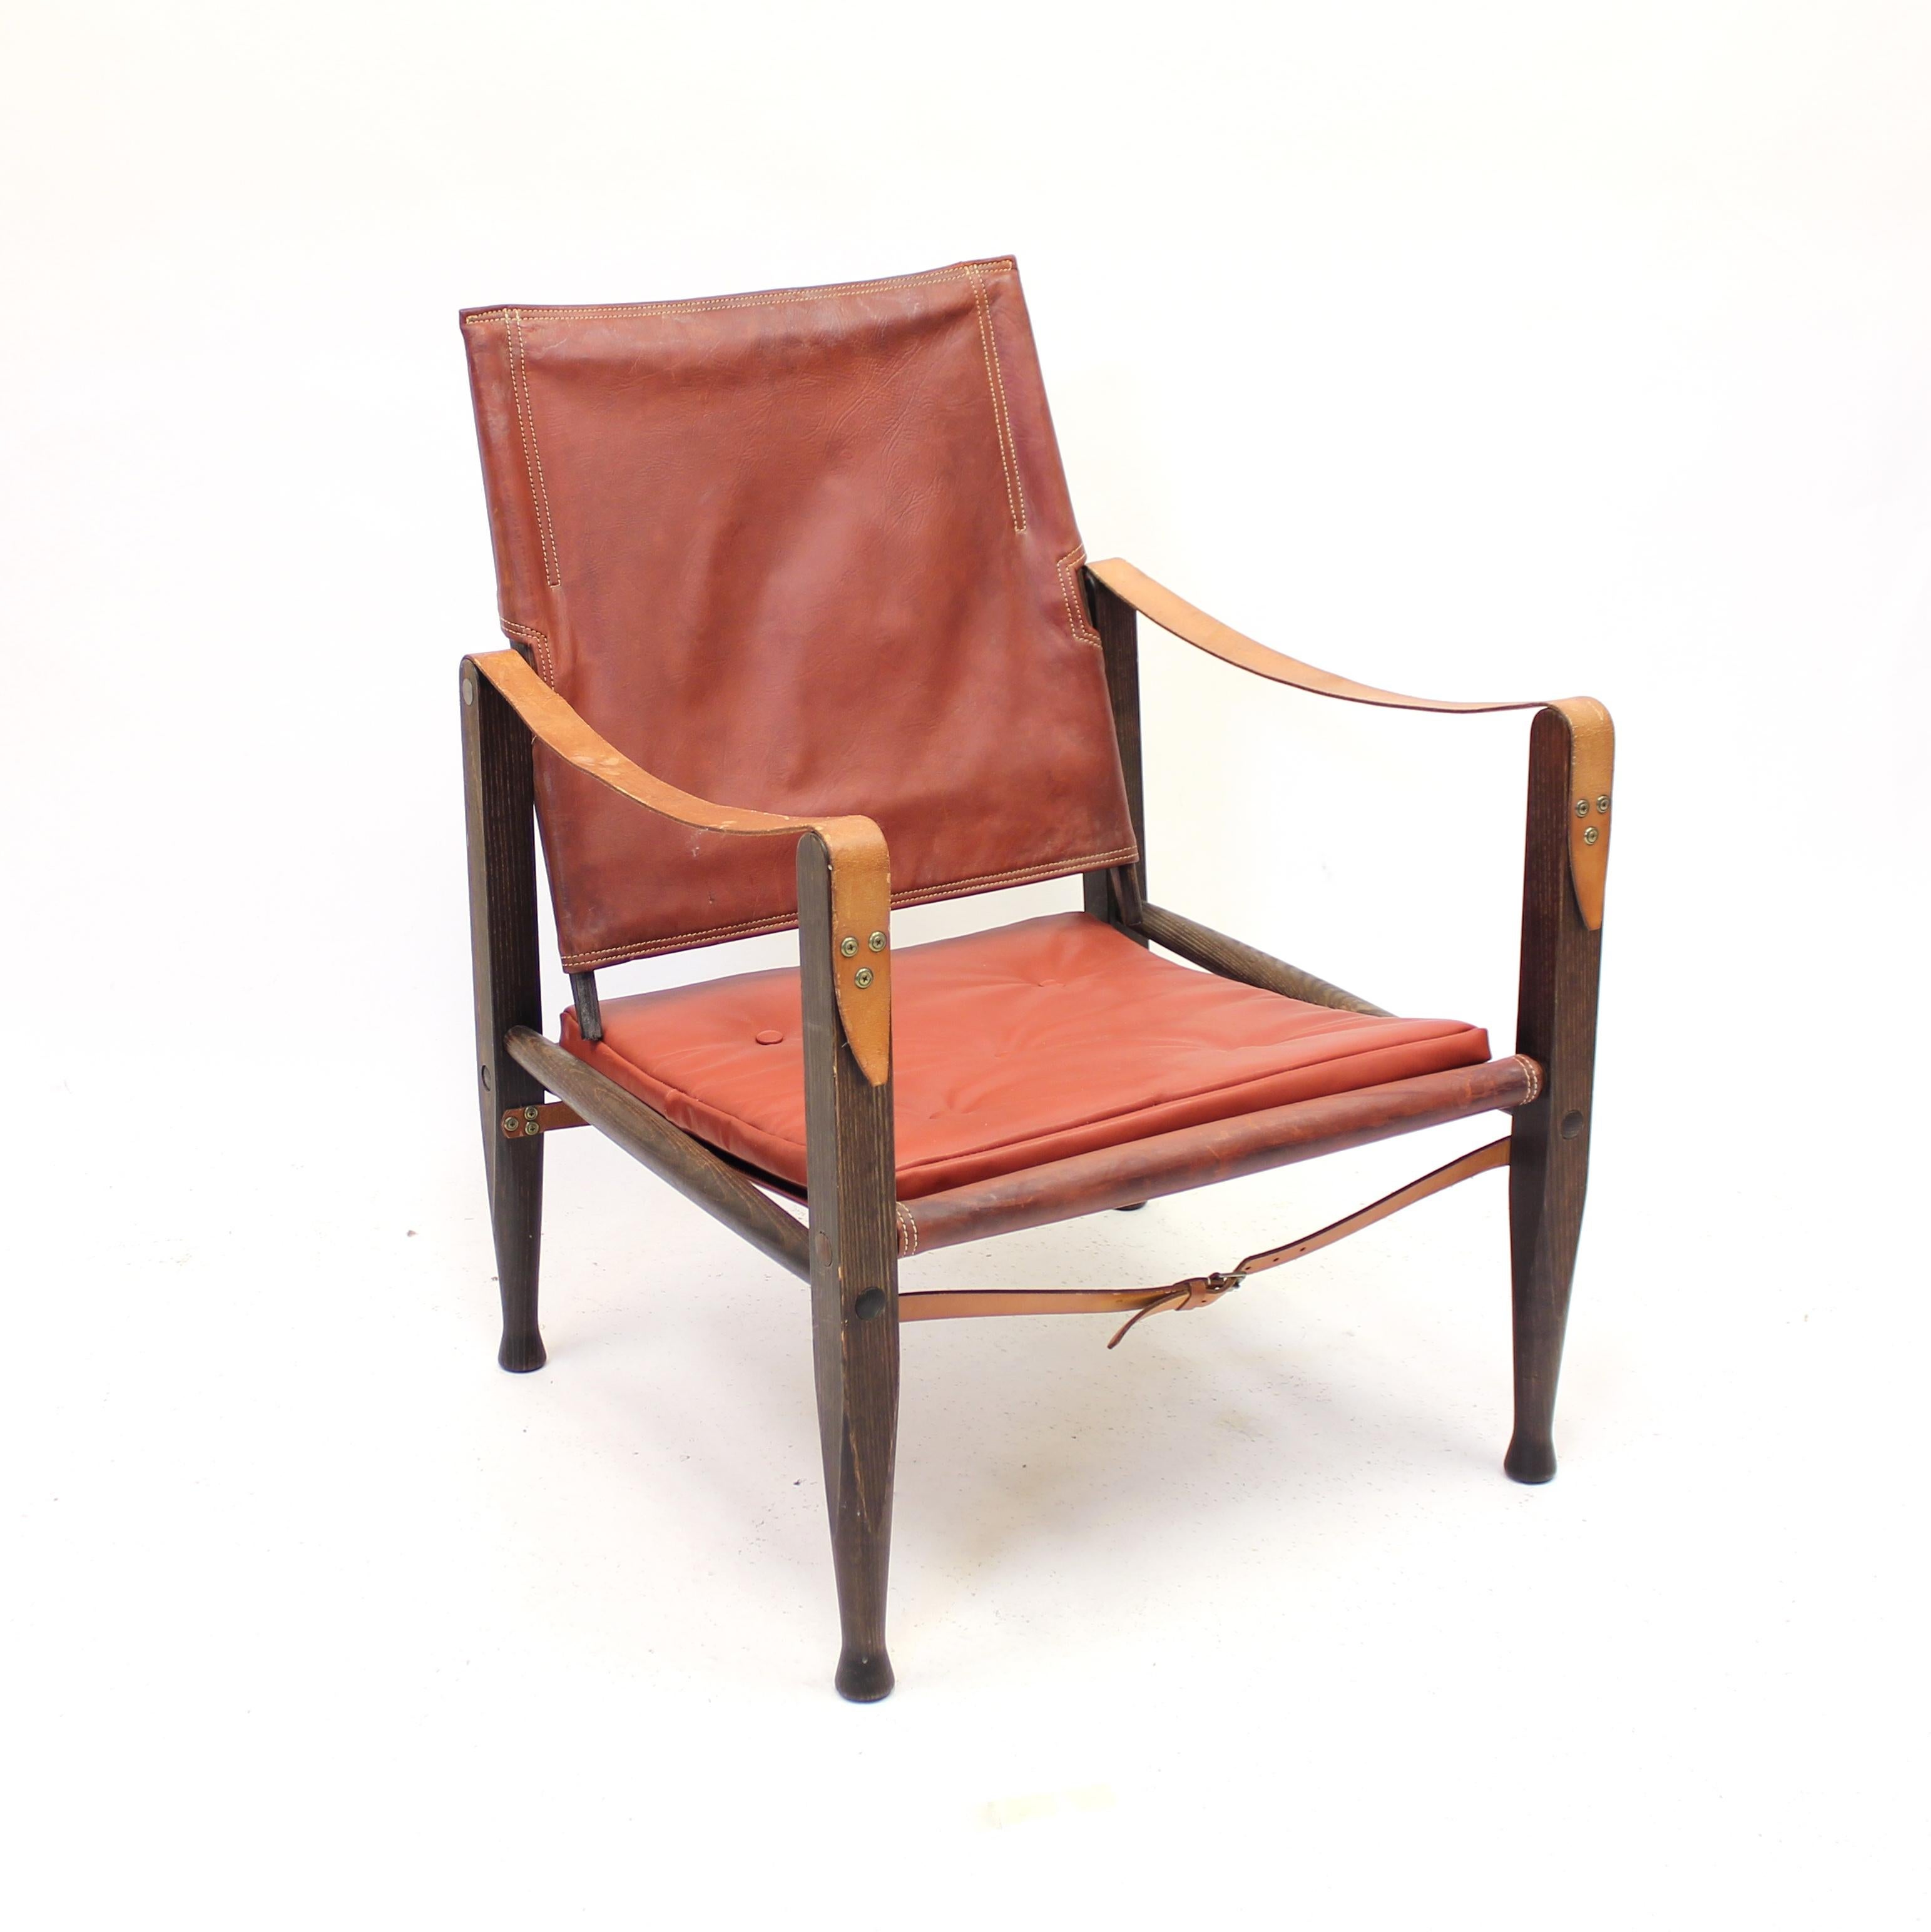 The legendary safari chair in cognac coloured leather on a very dark oak frame designed by the grandfather of Danish design, Kaare Klint, in 1933 for his long time collaborator Rud Rasmussen. This example is most likely produced in the mid-century